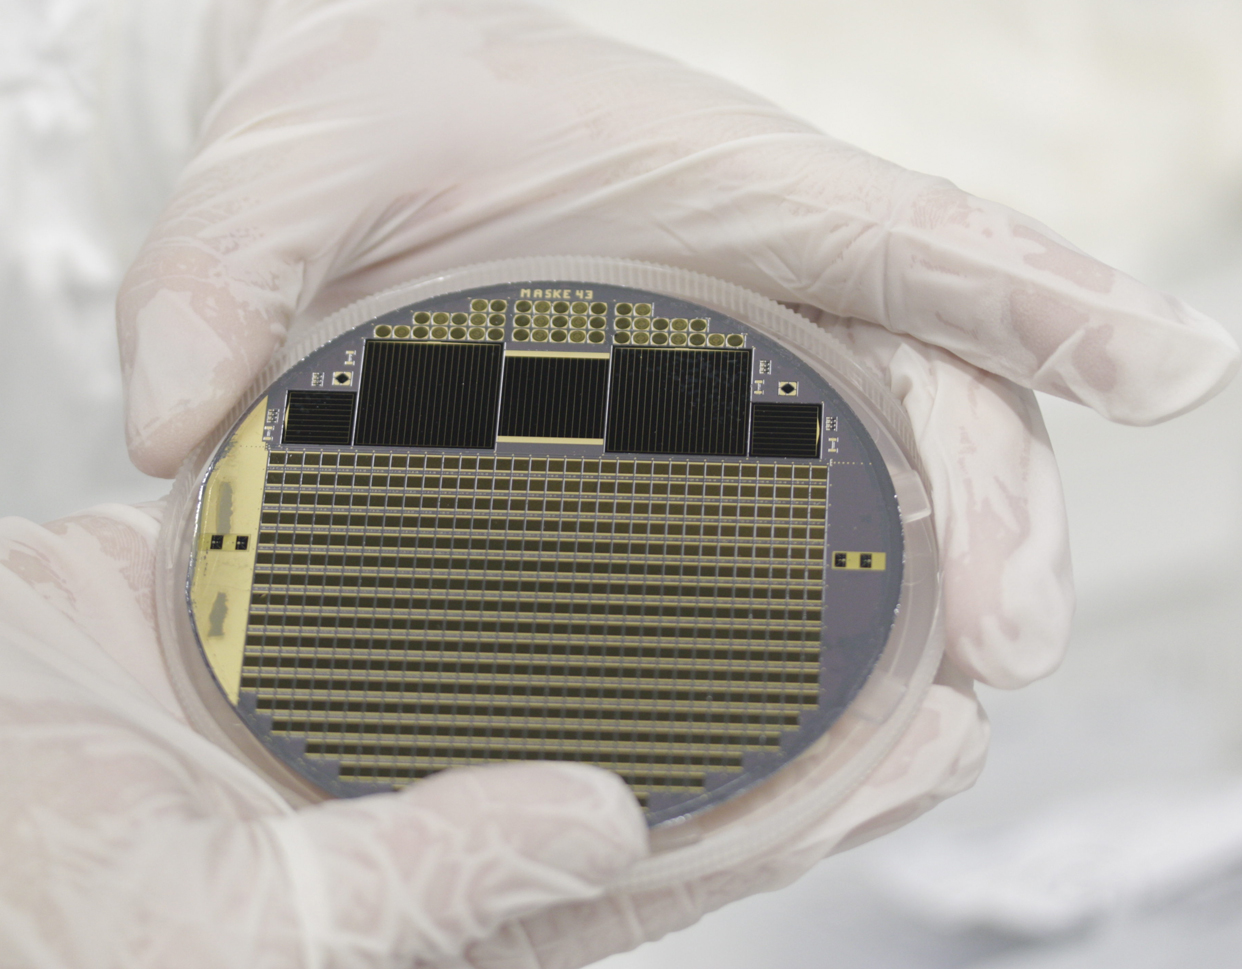 Image of a solar cell wafer with four-junction concentrator cells and test structures.